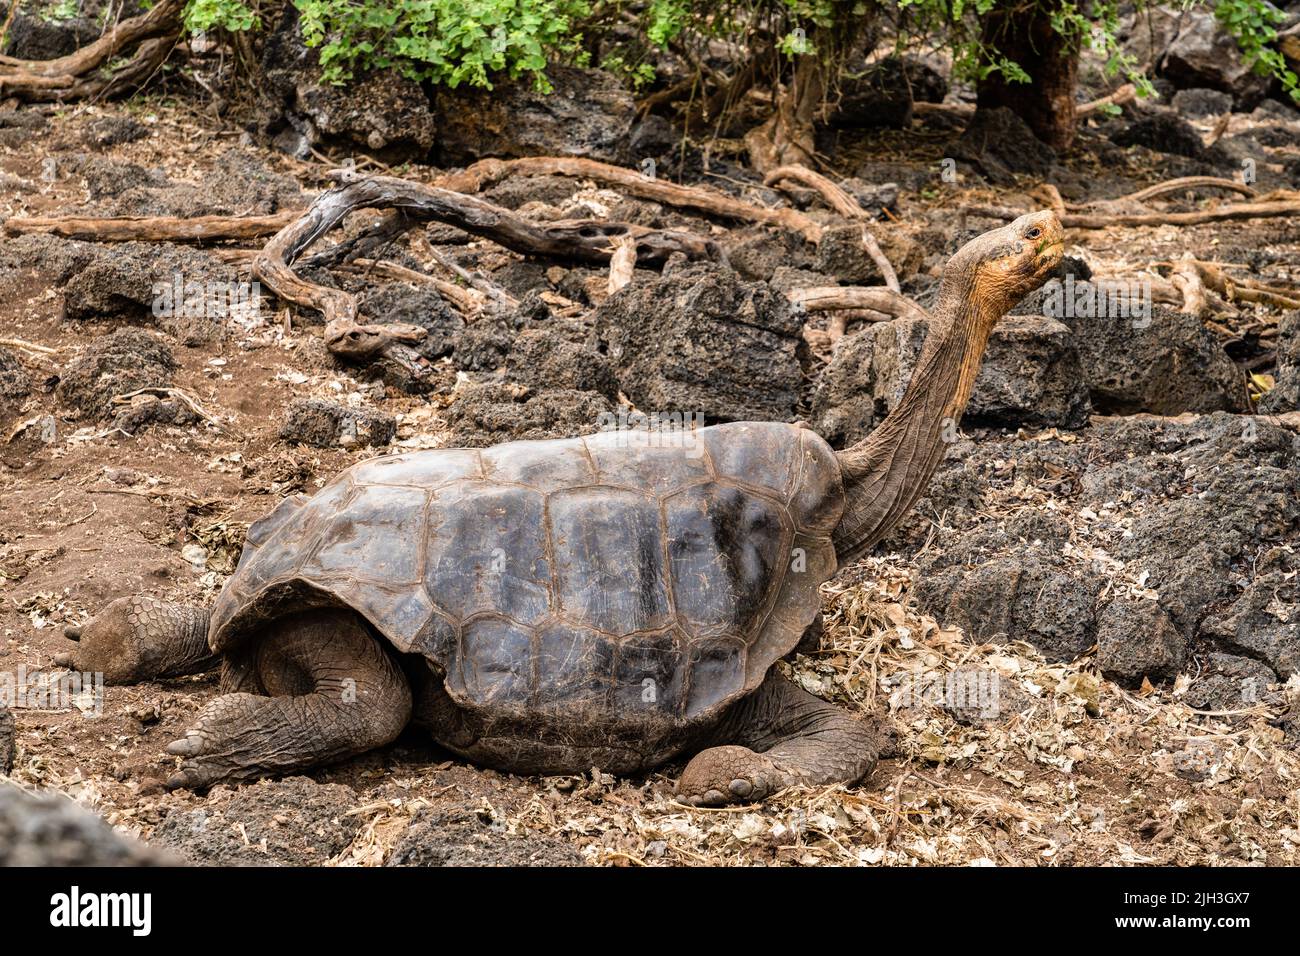 Saddlebacked Tortoise in the Galapagos has raised, saddle like shell, looks like a Brontosaurus with its long neck stretched out Stock Photo